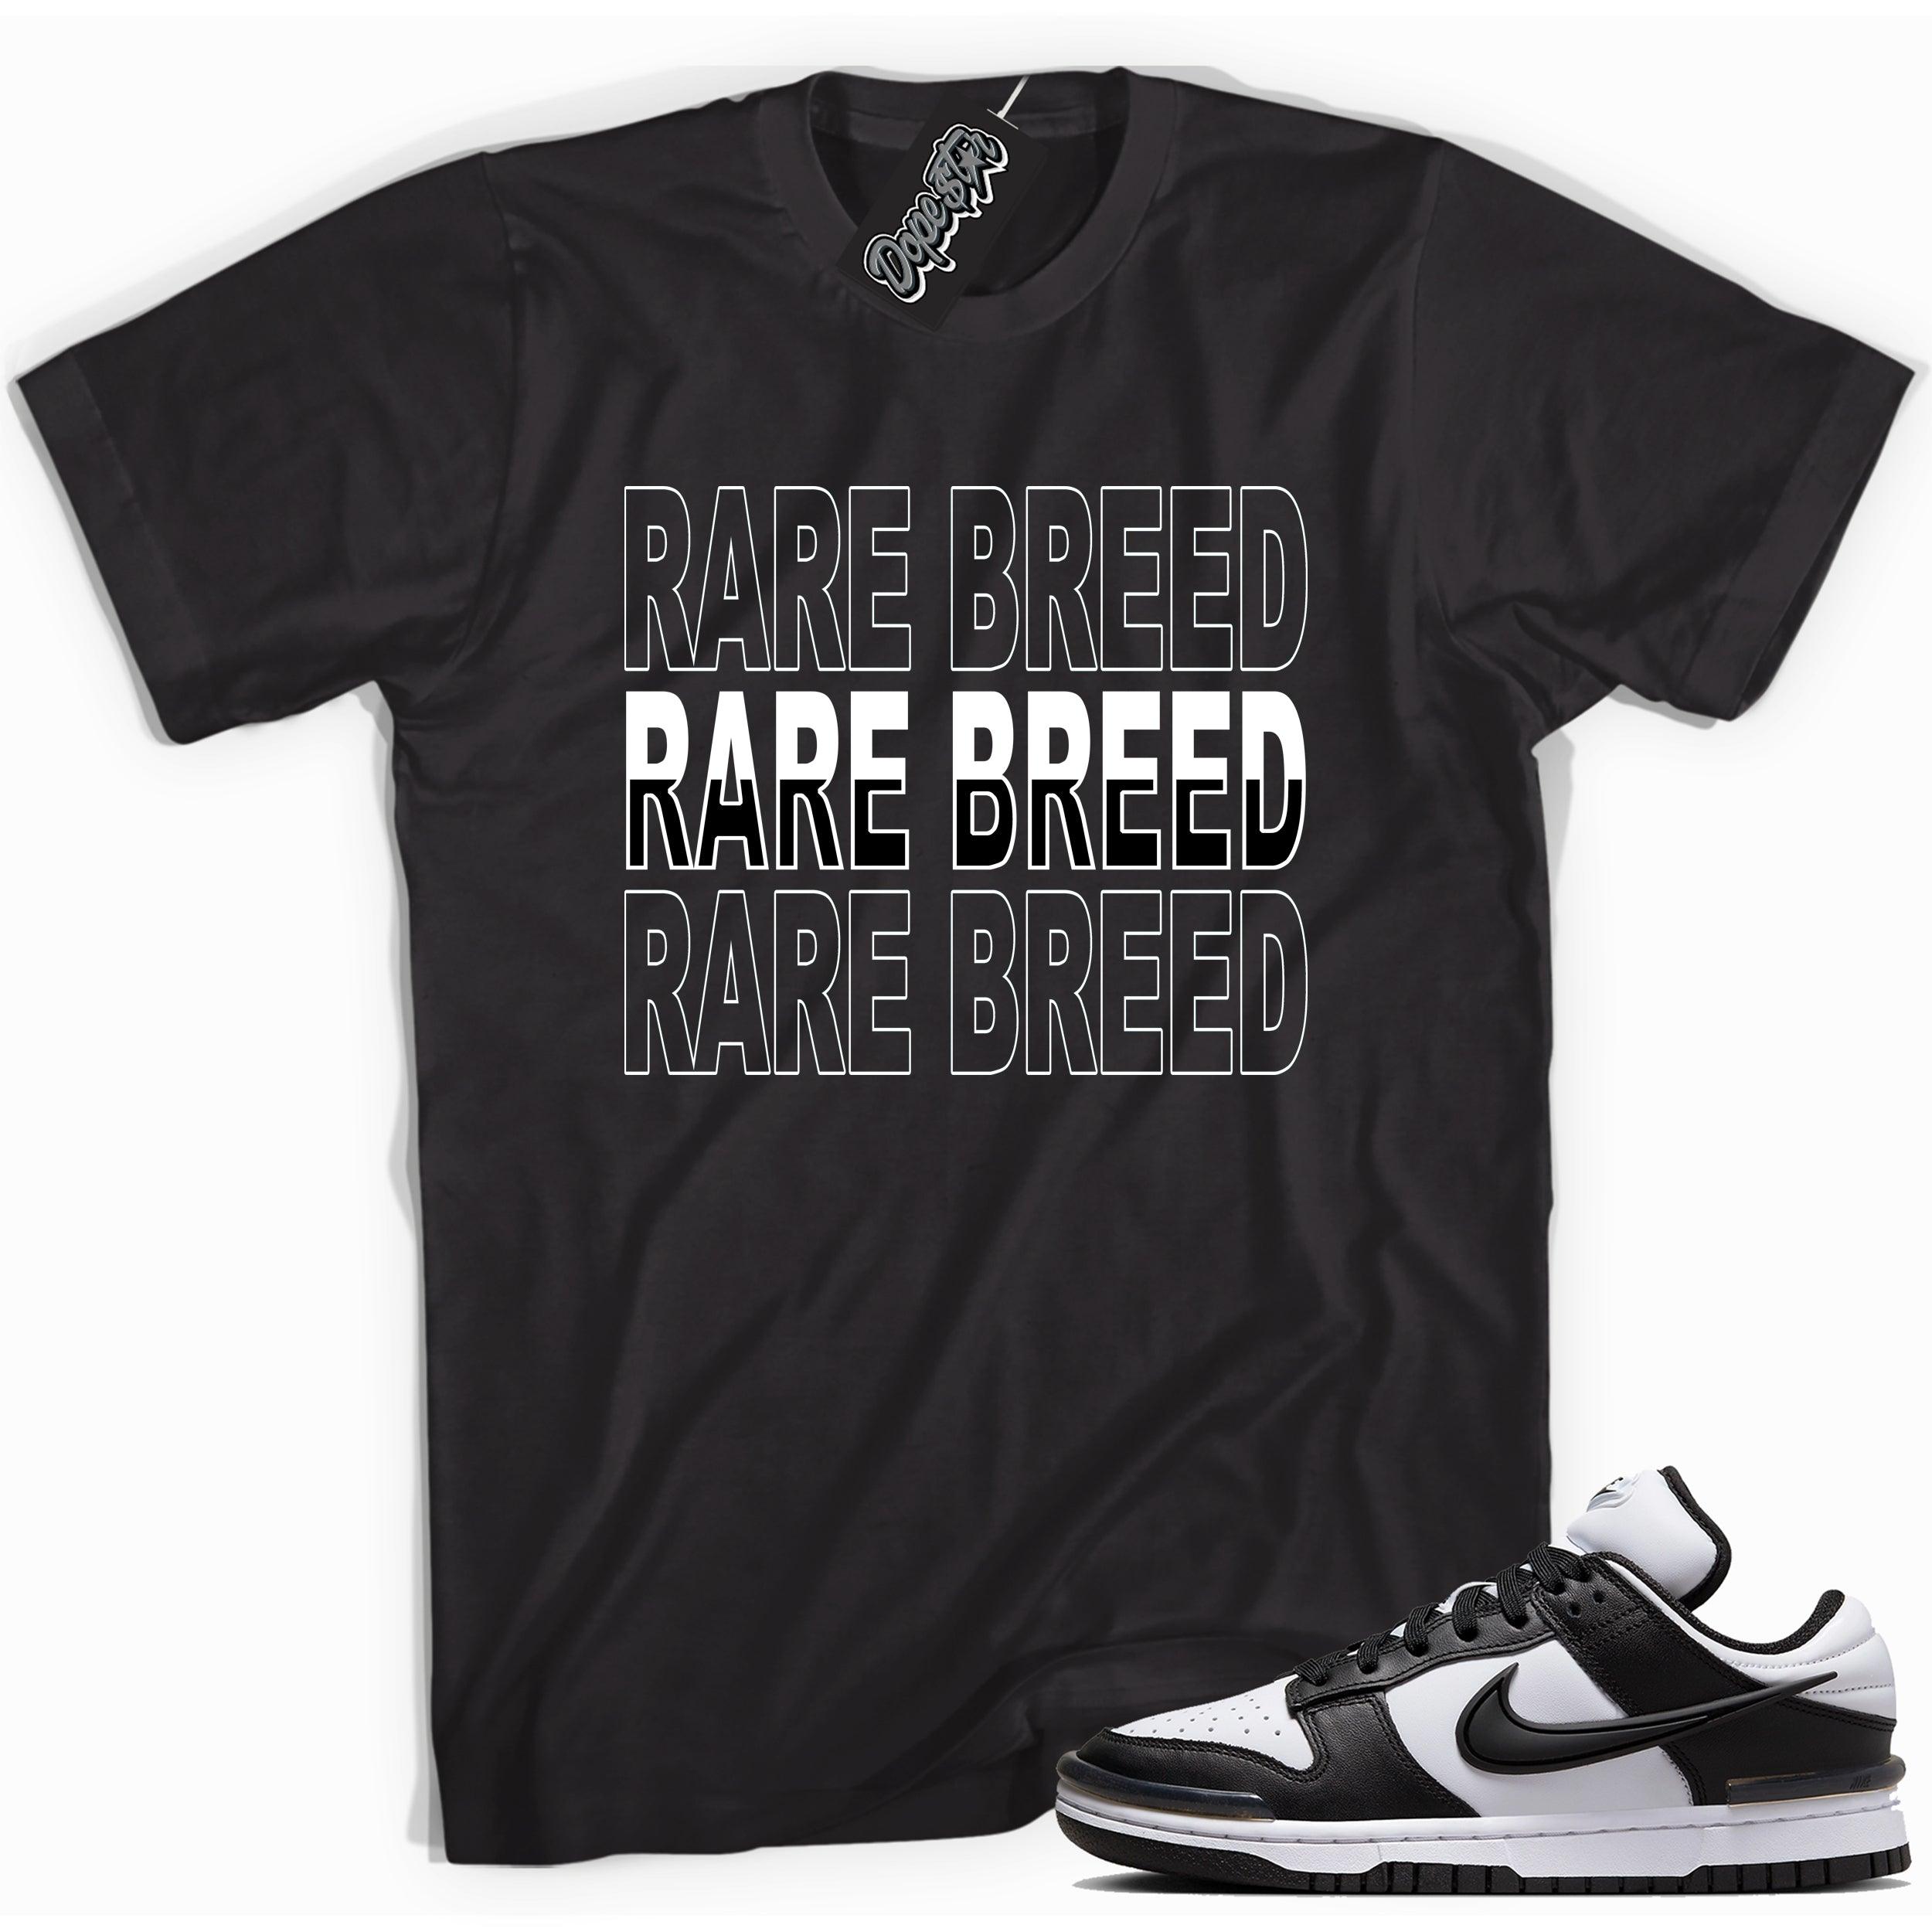 Cool black graphic tee with 'rare breed' print, that perfectly matches Nike Dunk Low Twist Panda sneakers.